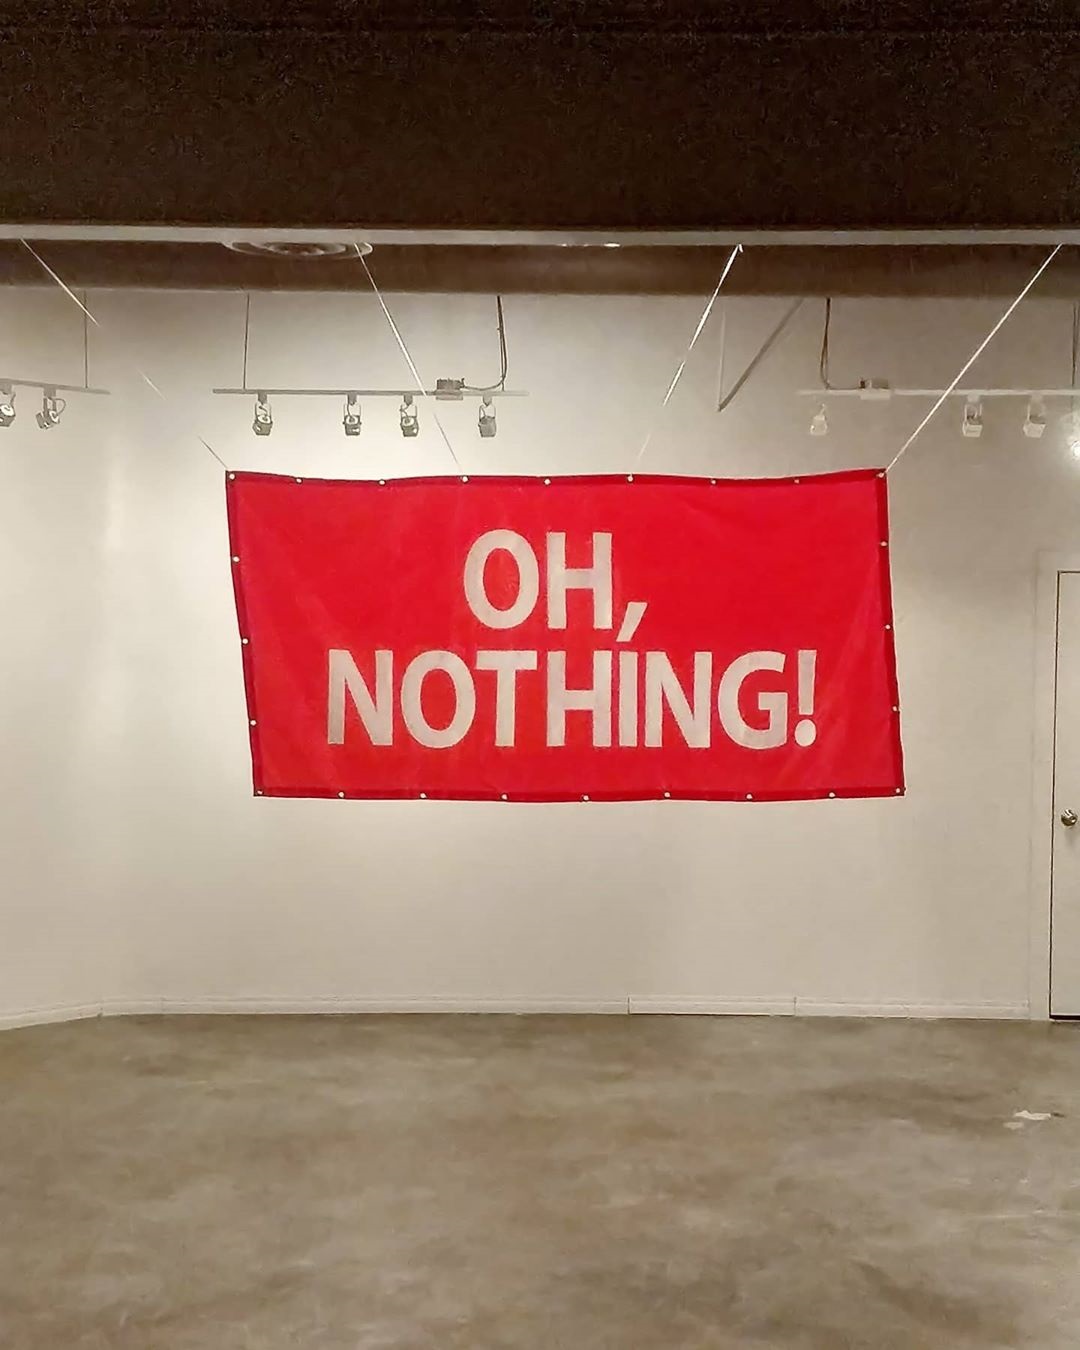 Oh, Nothing!